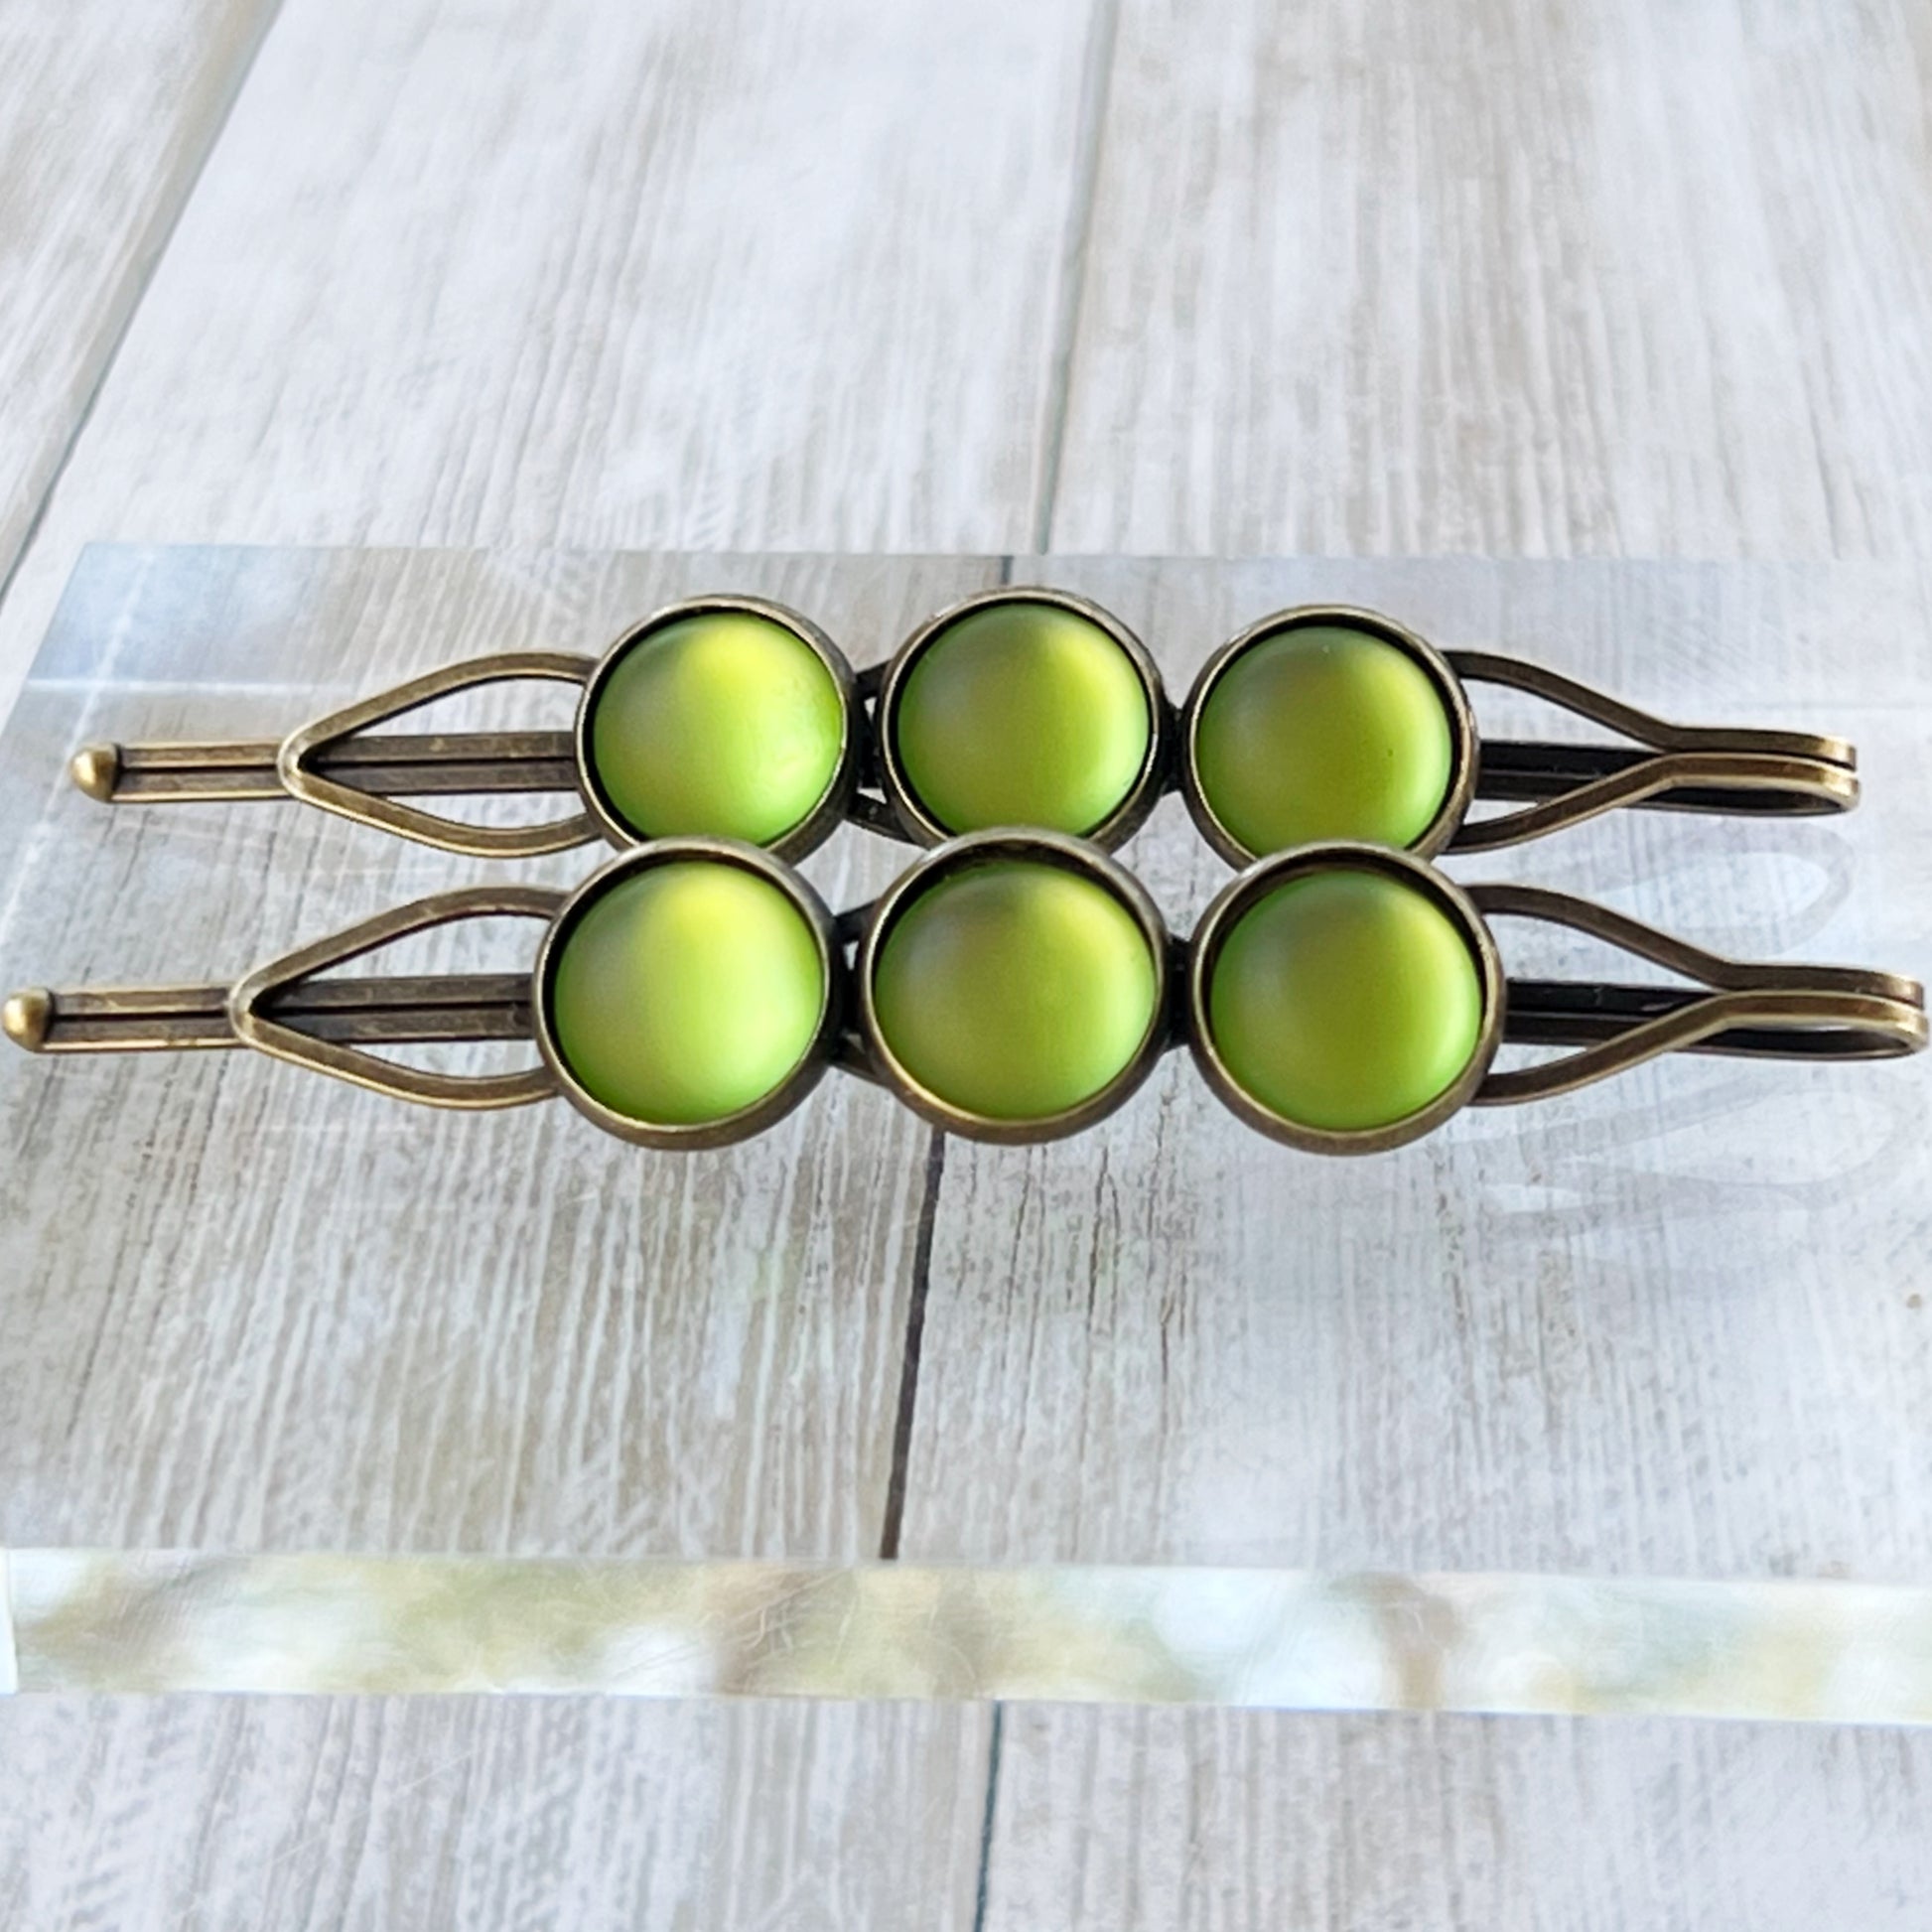 Candy Green Satin Acrylic Hair Pins: Sweet & Vibrant Accessories for Your Hair